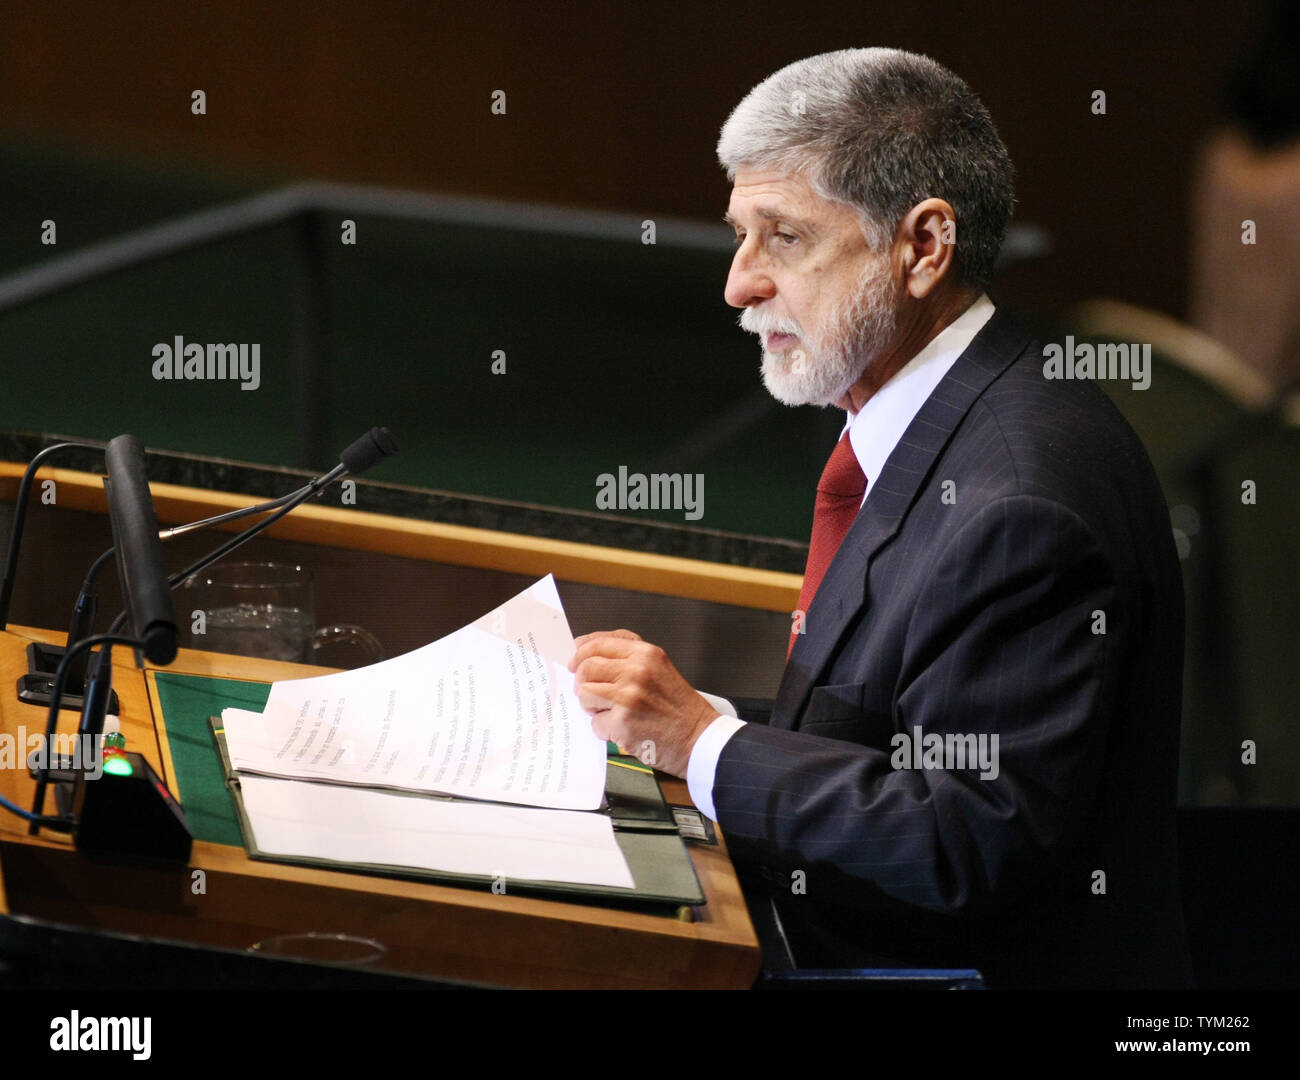 Minister for External Relations of Brazil Luiz Nunes Amorim speaks at the 65th session of the United Nations General Assembly at the UN on September 23, 2010 in New York.     UPI/Monika Graff Stock Photo